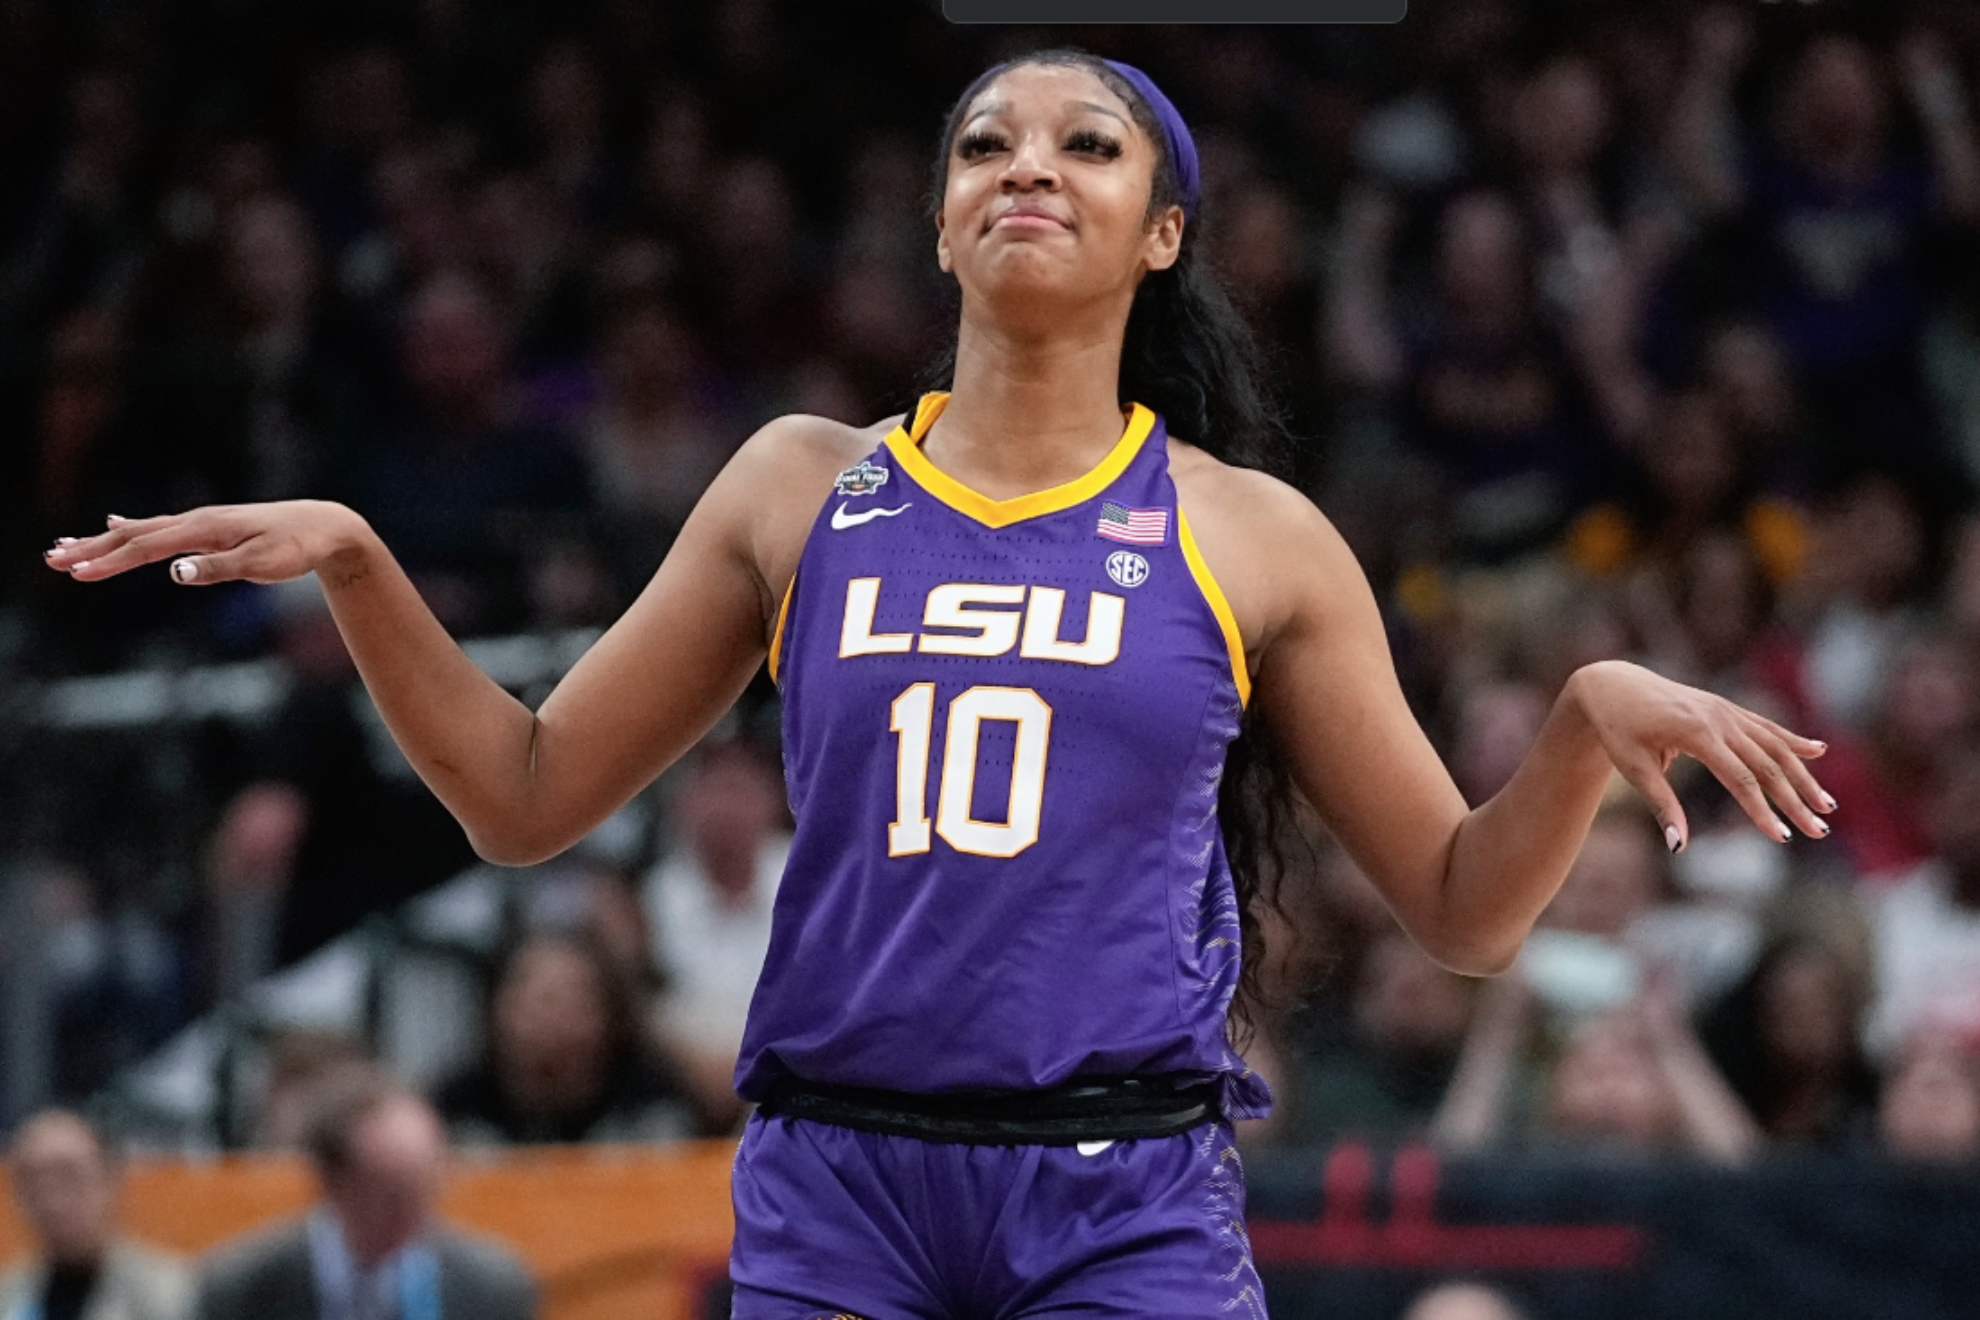 LSU coach Kim Mulkey remains tight-lipped on Angel Reese absence which causes further rumors